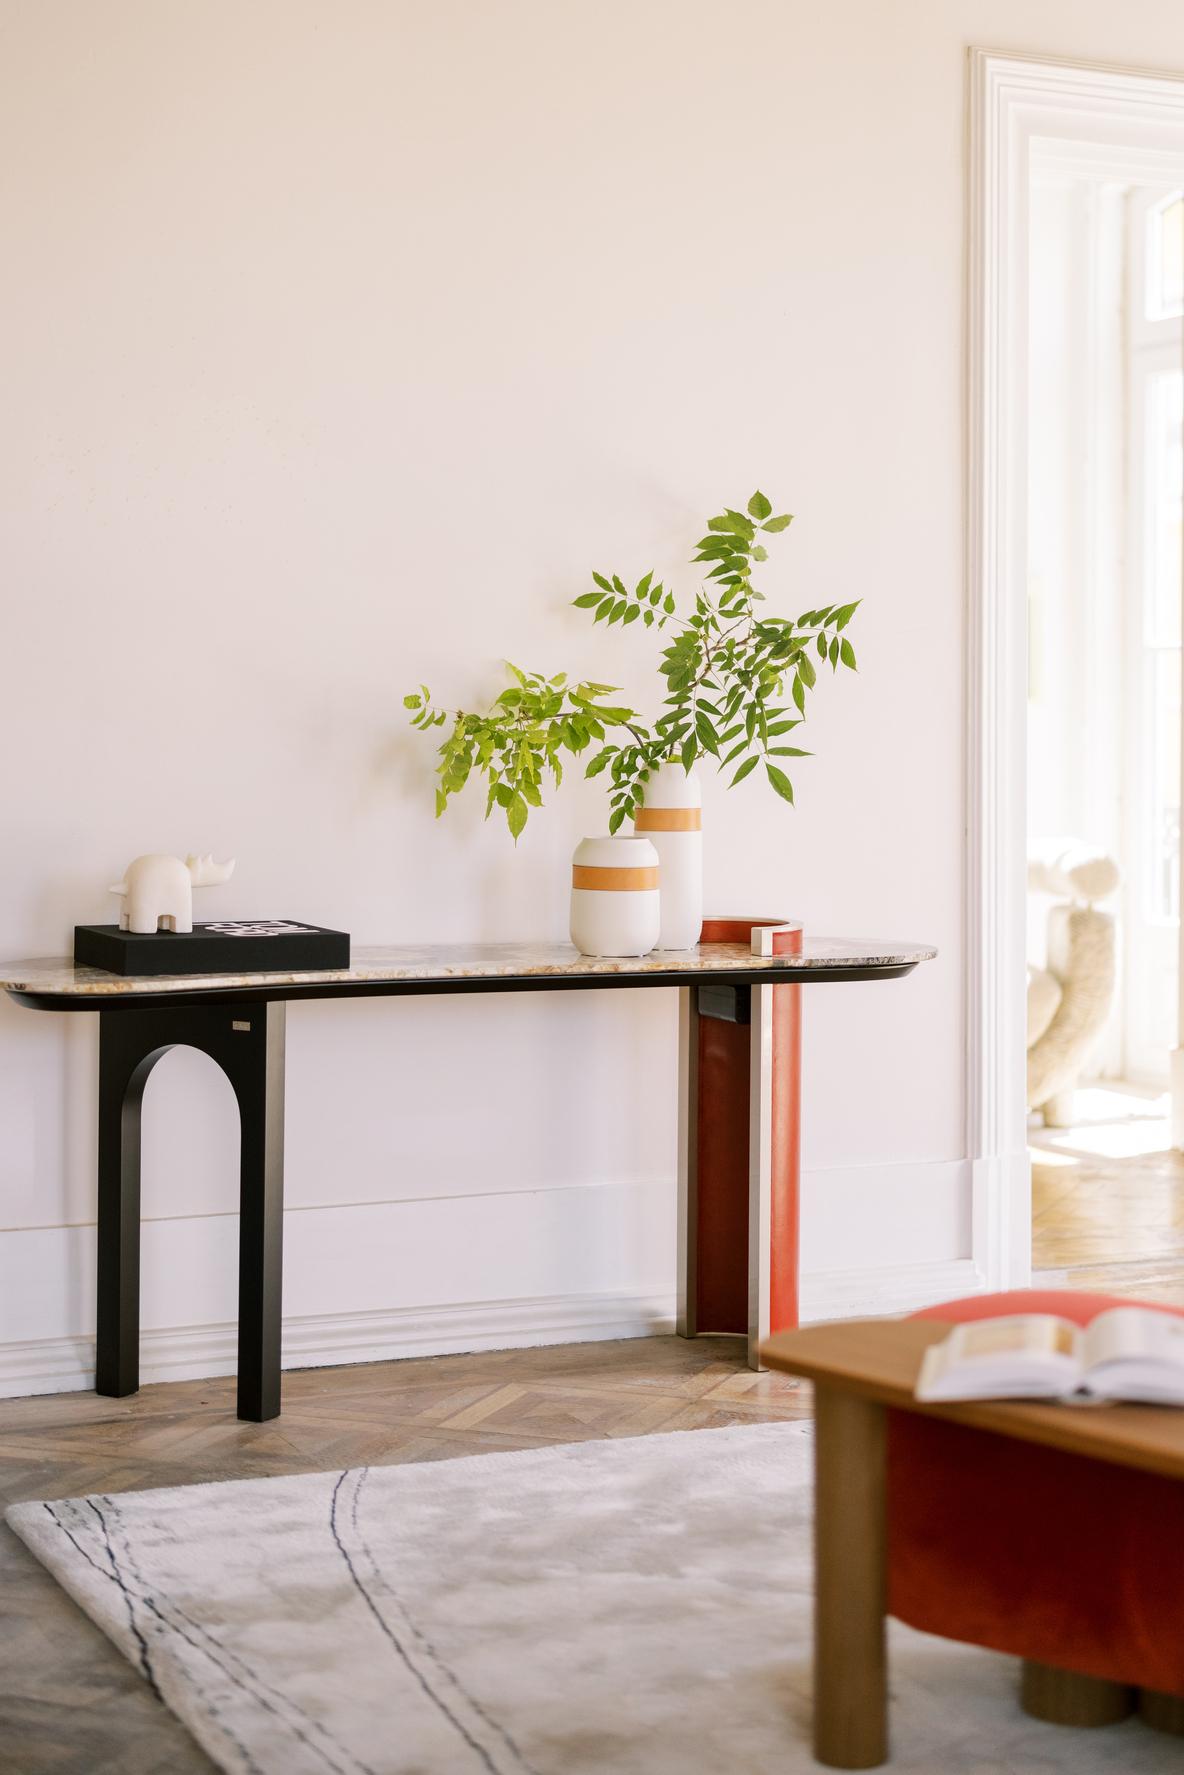 Chiado Console, Contemporary Collection, Handcrafted in Portugal - Europe by Greenapple.

Designed by Rute Martins for the Contemporary Collection, the Chiado console table honors Lisbon’s historic quarter, capturing the essence of its artistic life